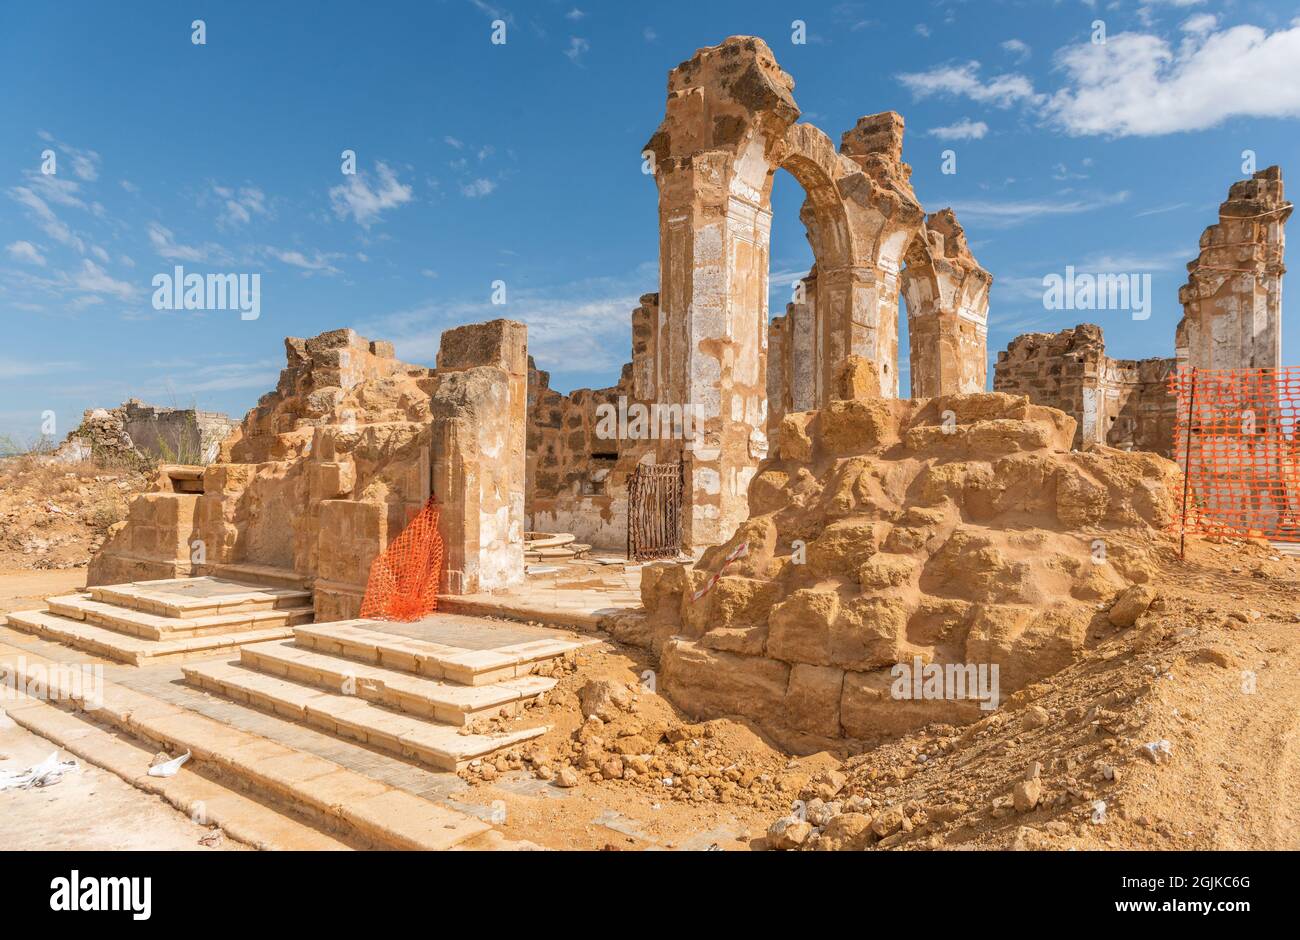 remnants of the 1968 earthquake at Montevago, Sicily, Italy Stock Photo